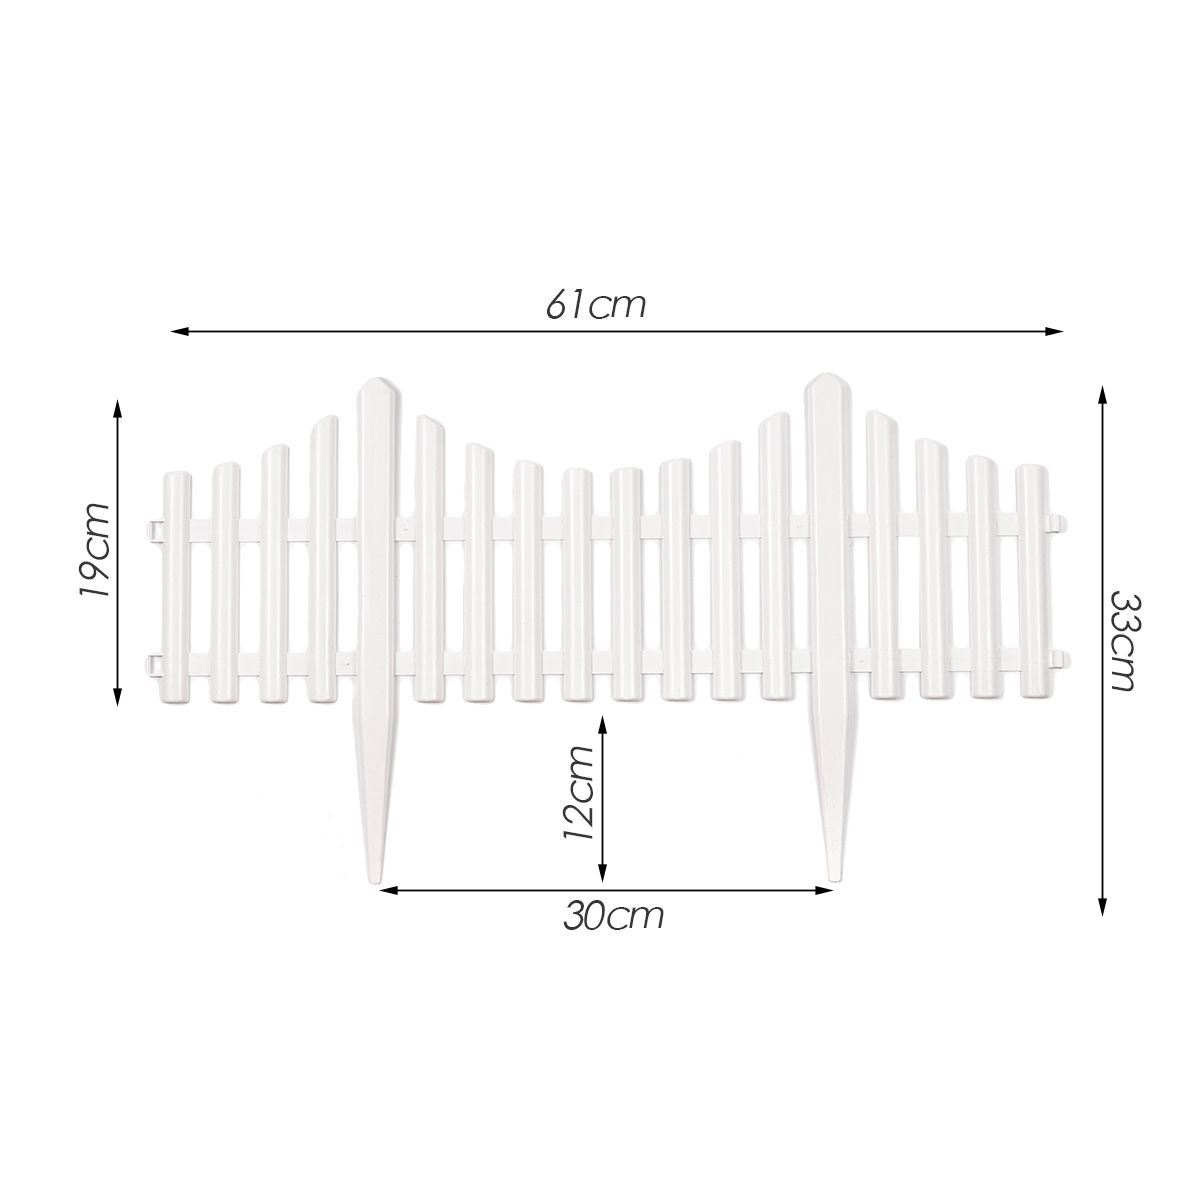 6PCS-PVC--Plastic-White-Fence-Courtyard-Indoor-European-Style-For-Garden-Vegetable-Driveway-1709891